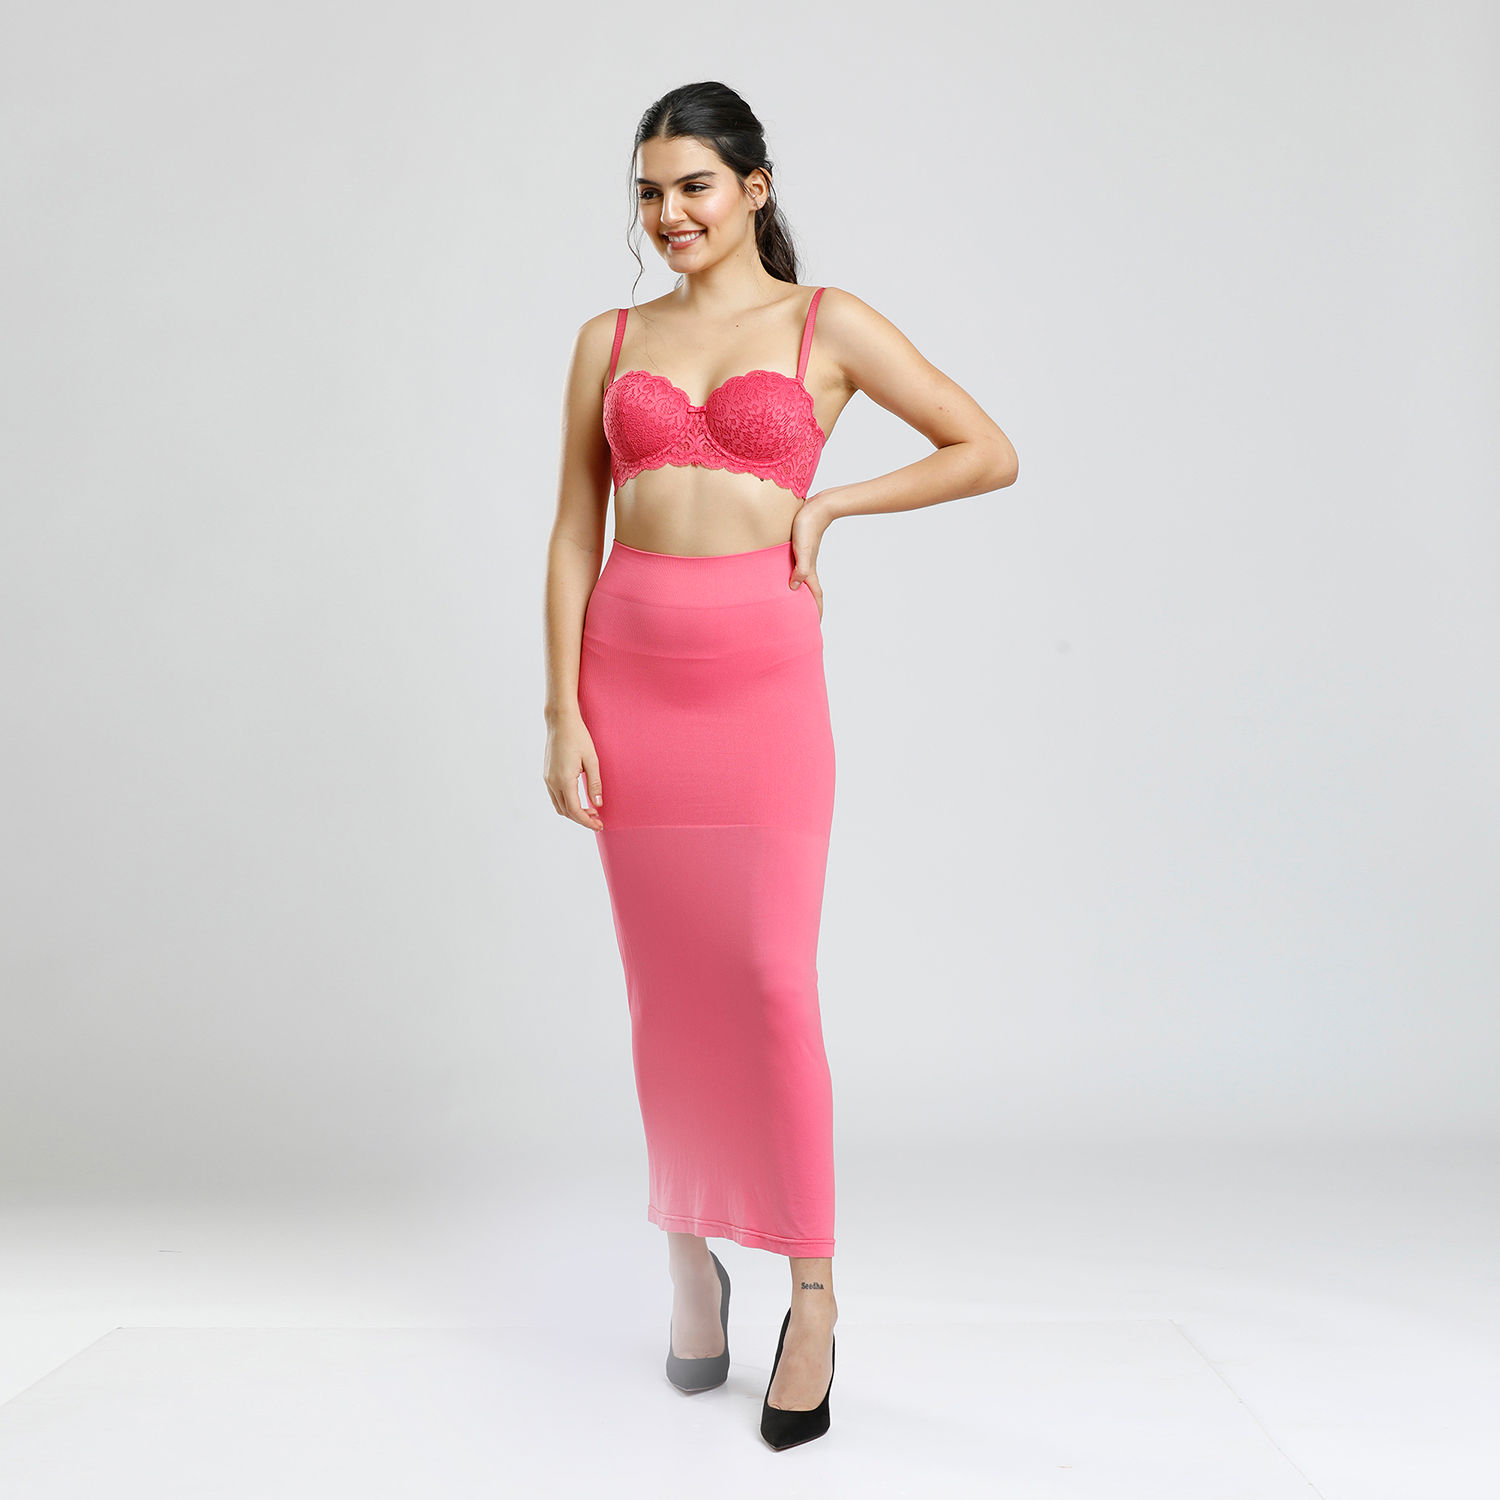 Zivame - To-do list: THROW AWAY YOUR OLD PETTICOATS. Try Zivame Saree  Shapewear with high compression fabric that sculpts your waist, thighs &  rear to give you a mermaid silhouette. Why settle